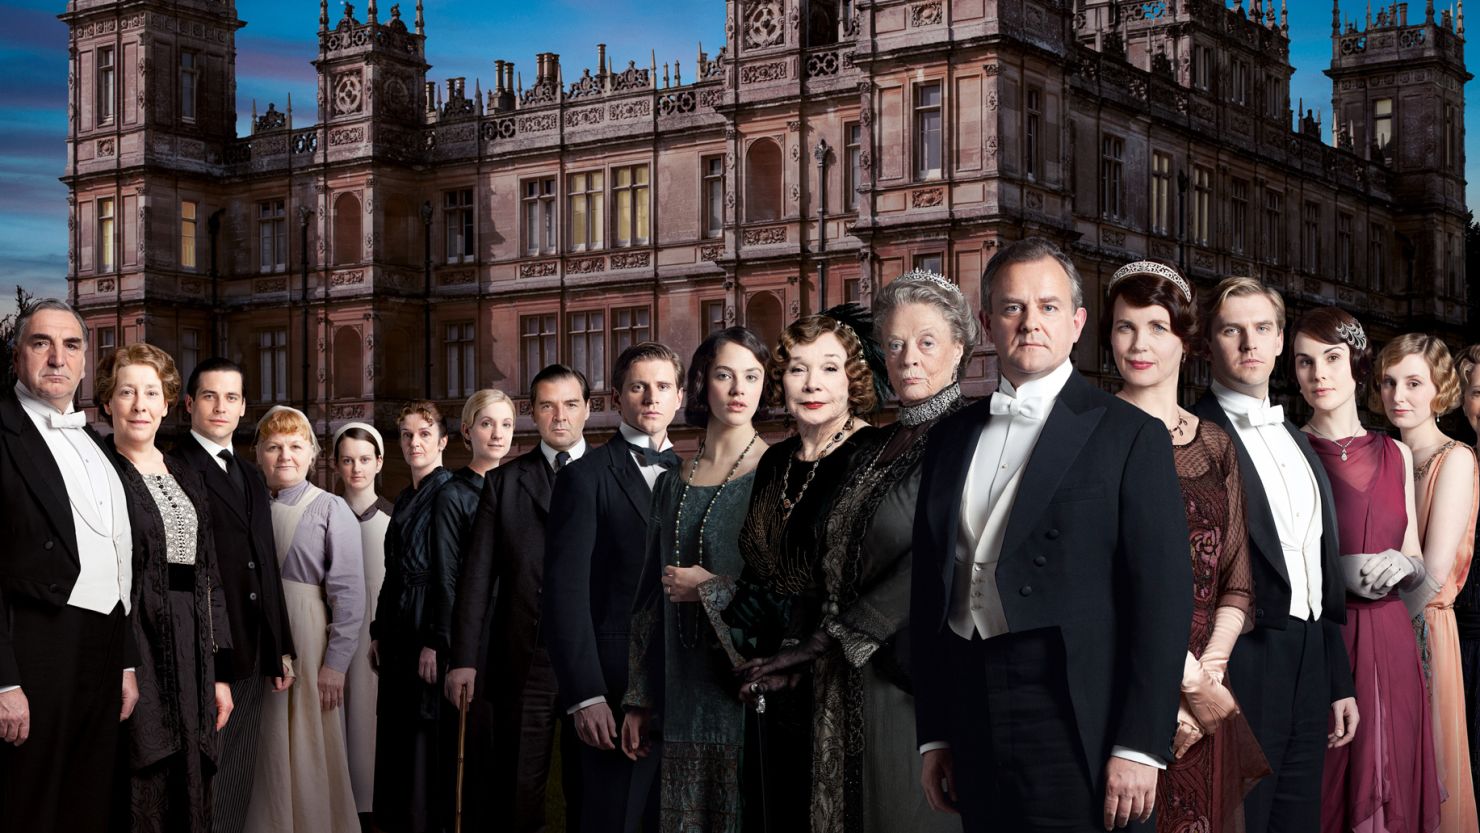 Season three of  "Downton Abbey" has been full of startling revelations from the Crawley family and their employees.